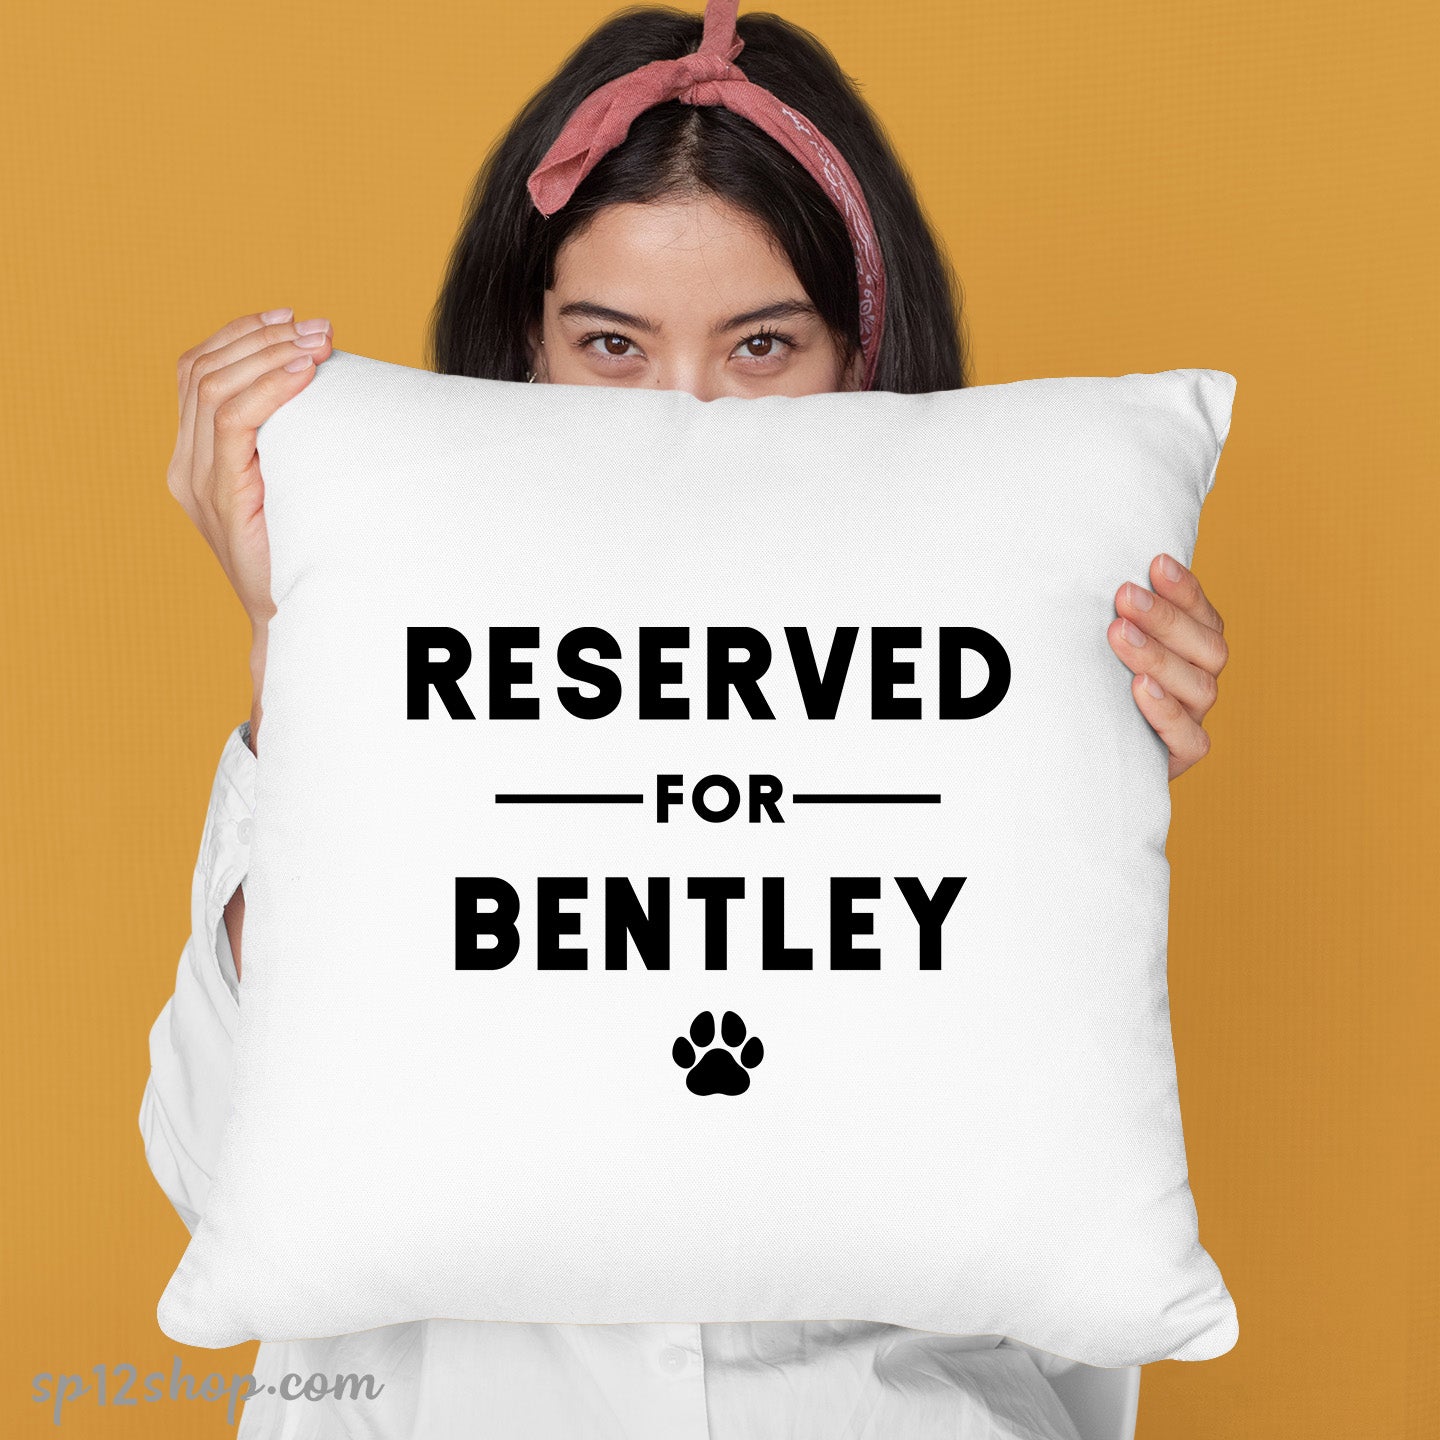 Personalised Reserved For The Pet Cushion Cover